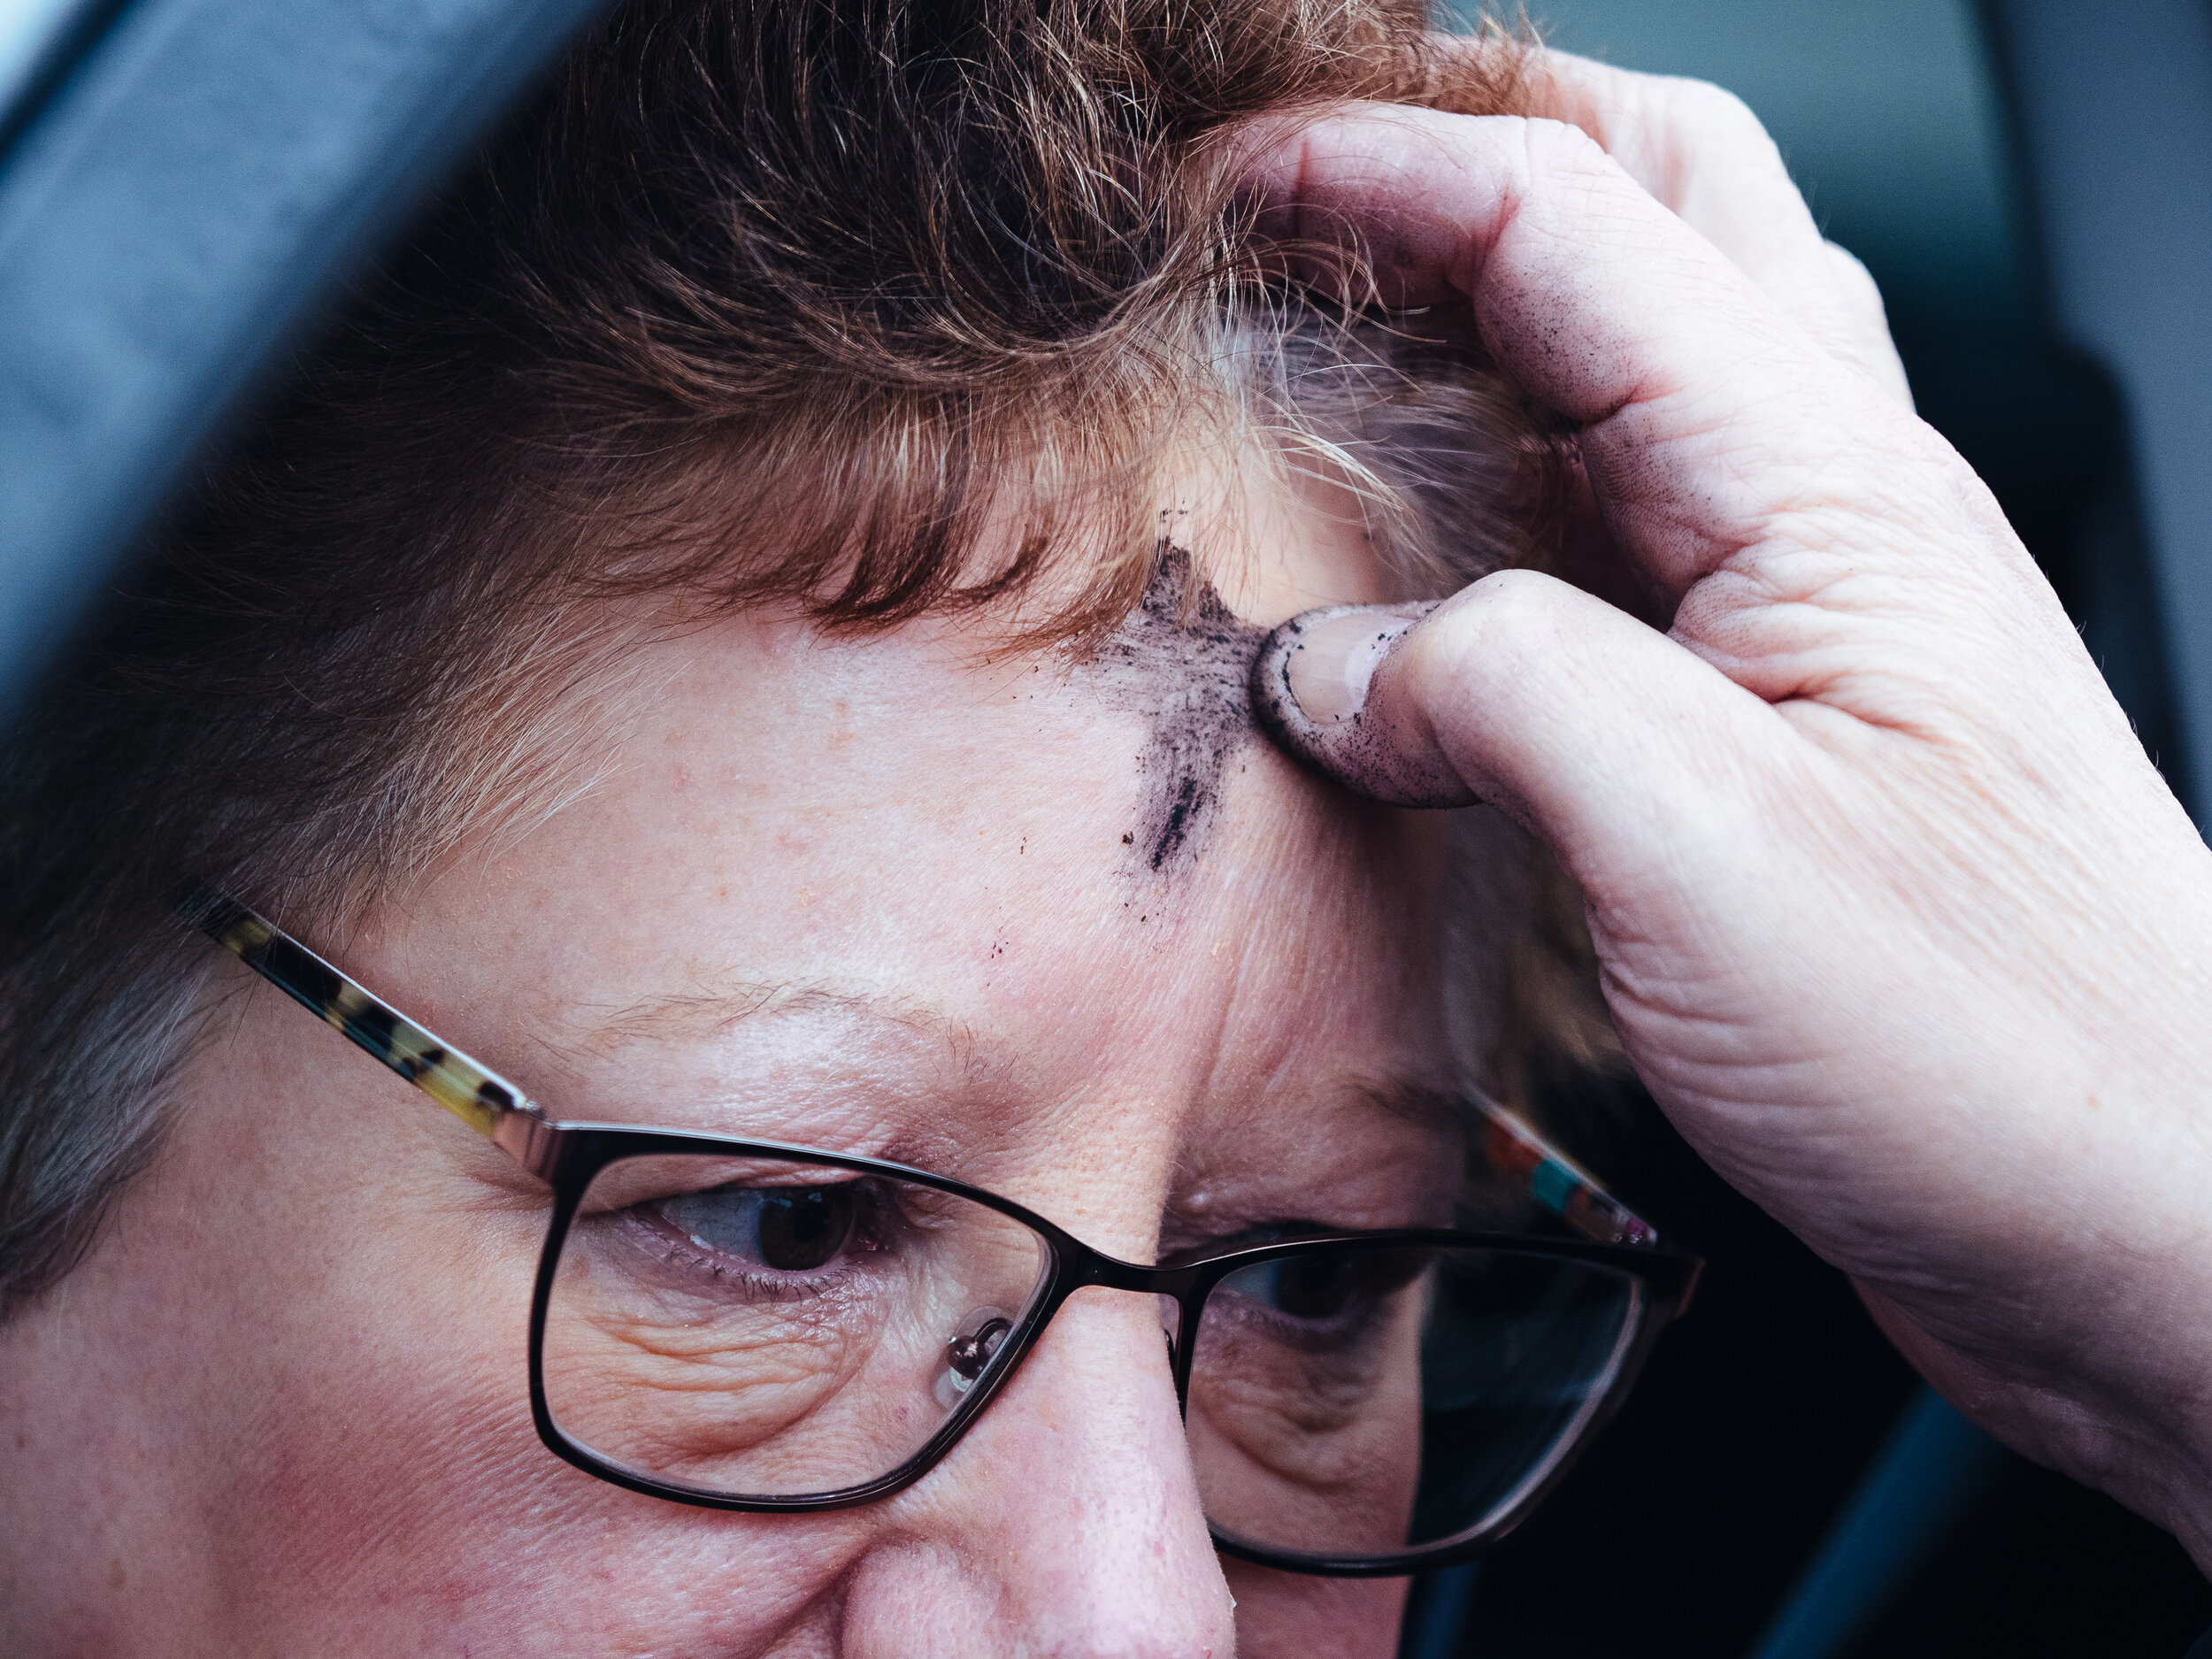  For the sixth year running, Faith Lutheran Church in White Oak held its annual “drive through ashes,” where people could receive ashes for Ash Wednesday, in the front parking lot of the church without having to leave their cars on Feb., 26, 2020.  